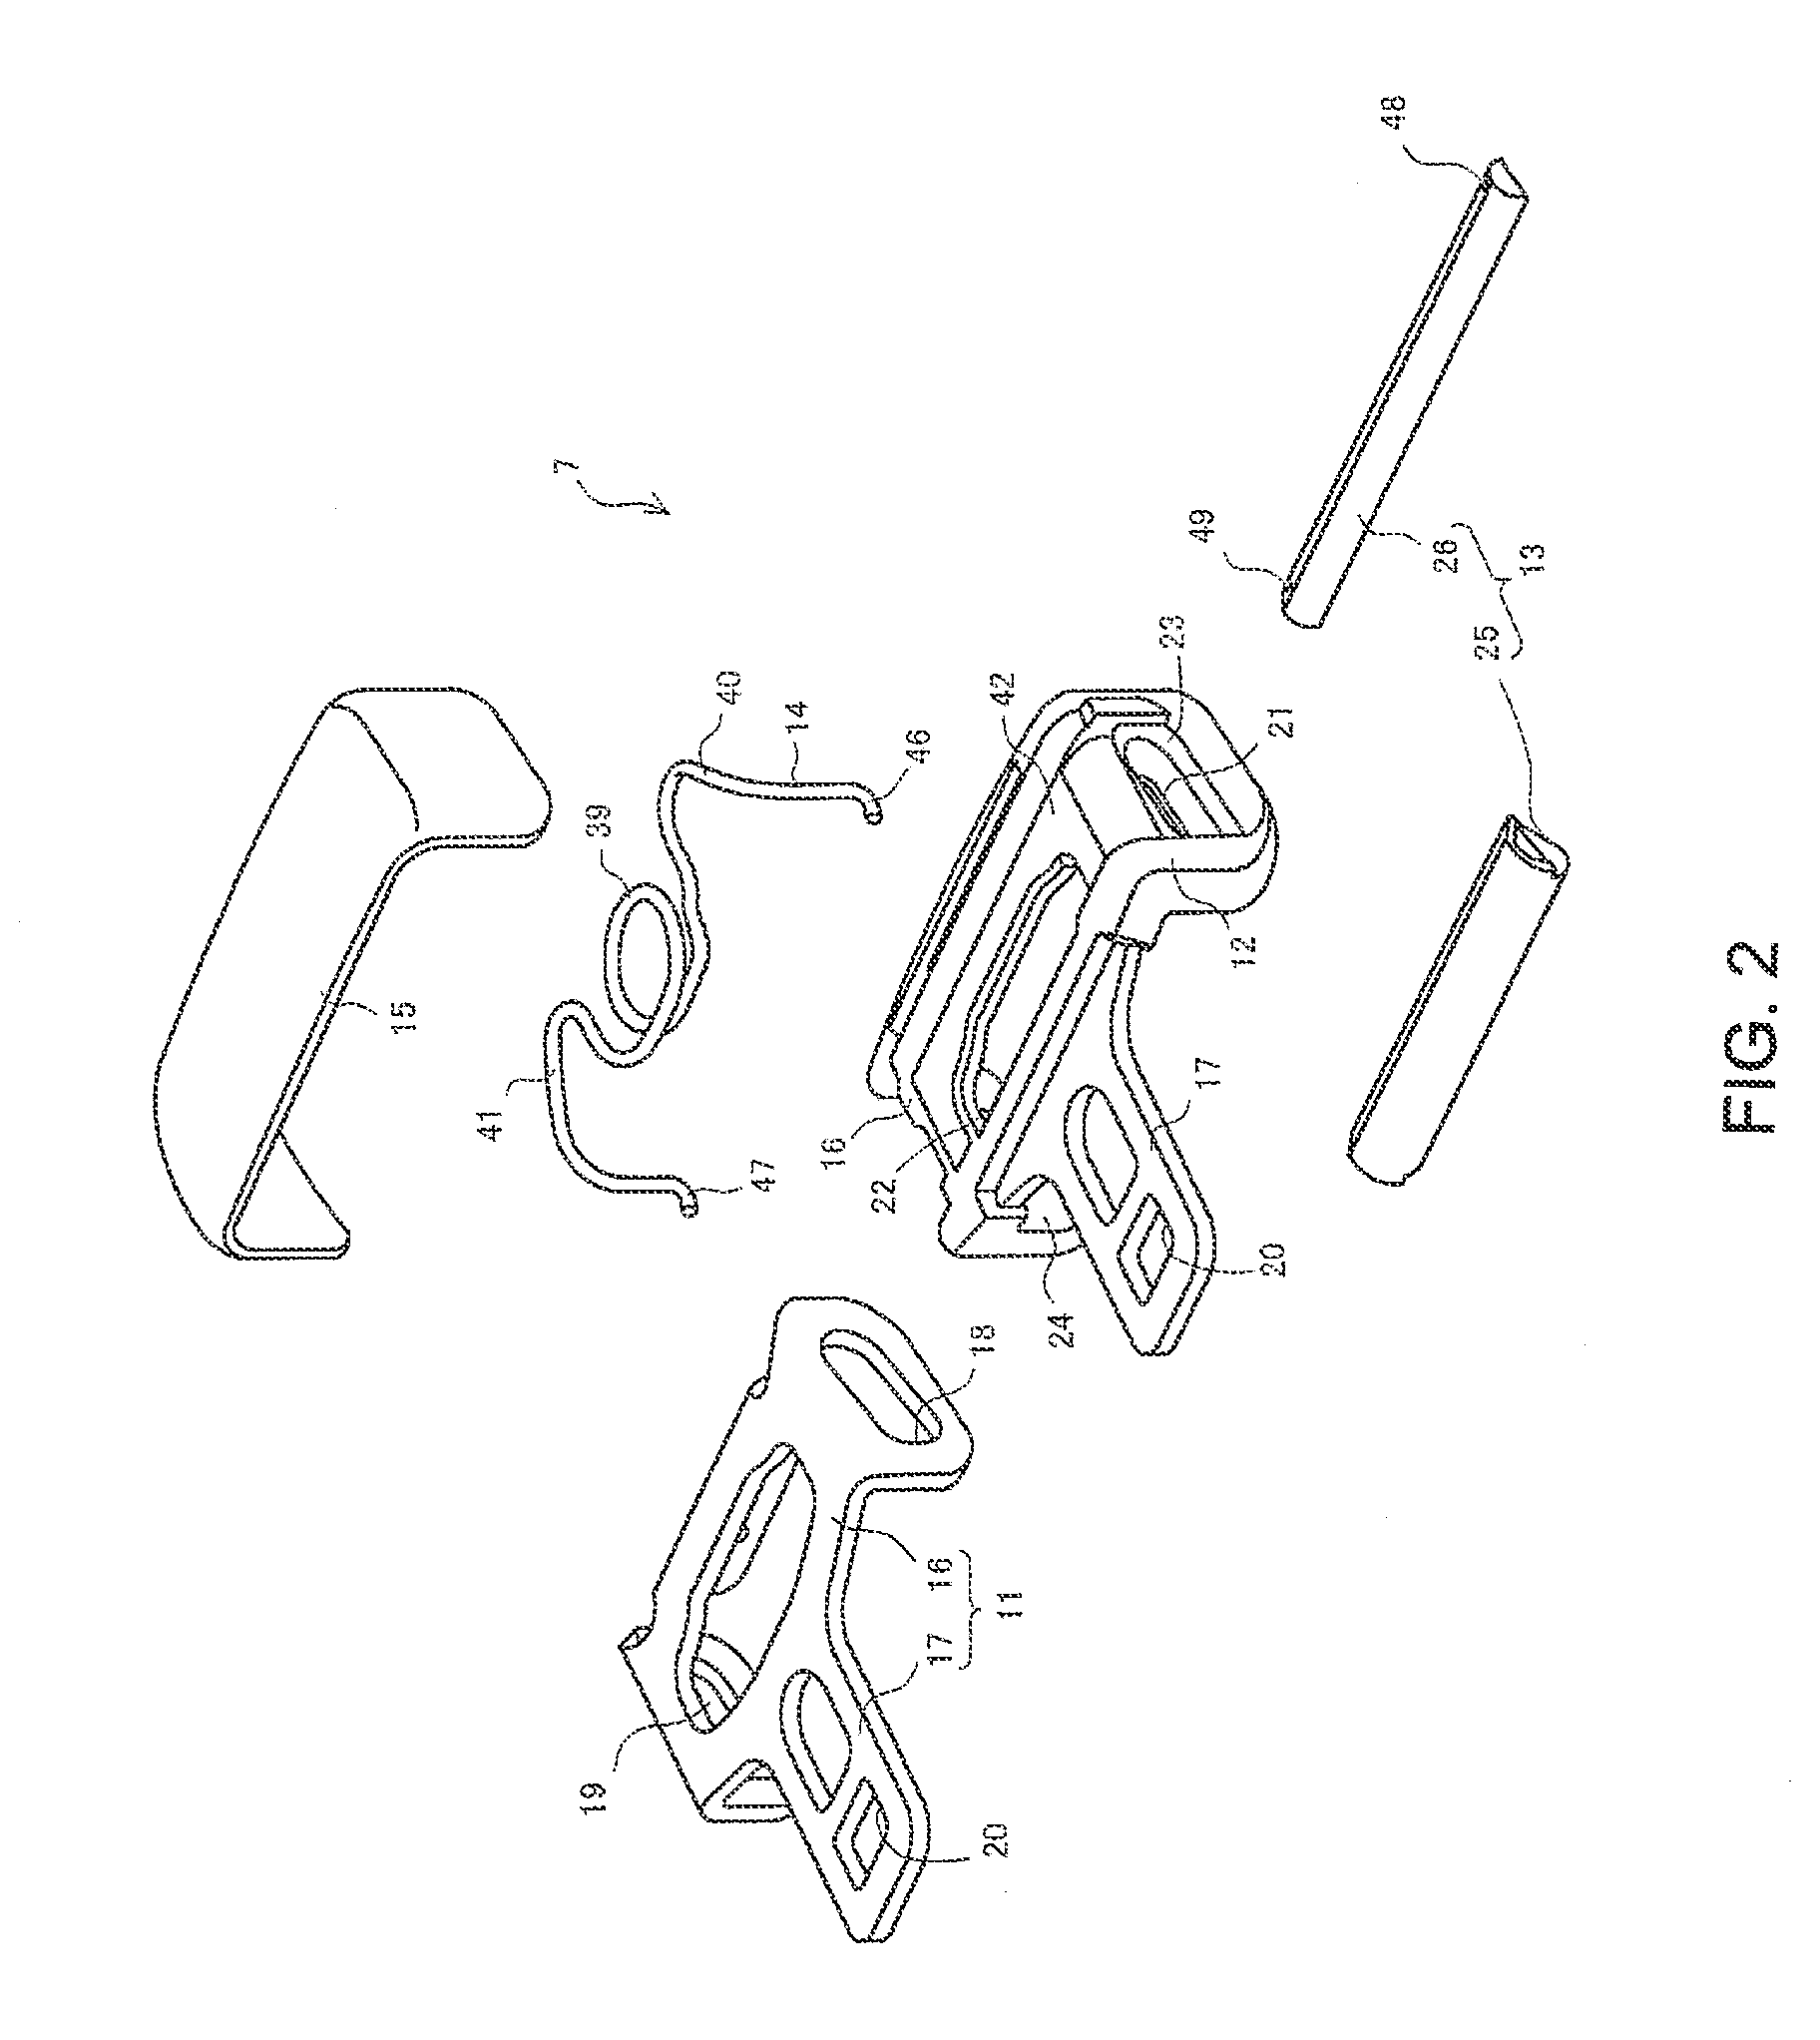 Tongue and seat belt device using same